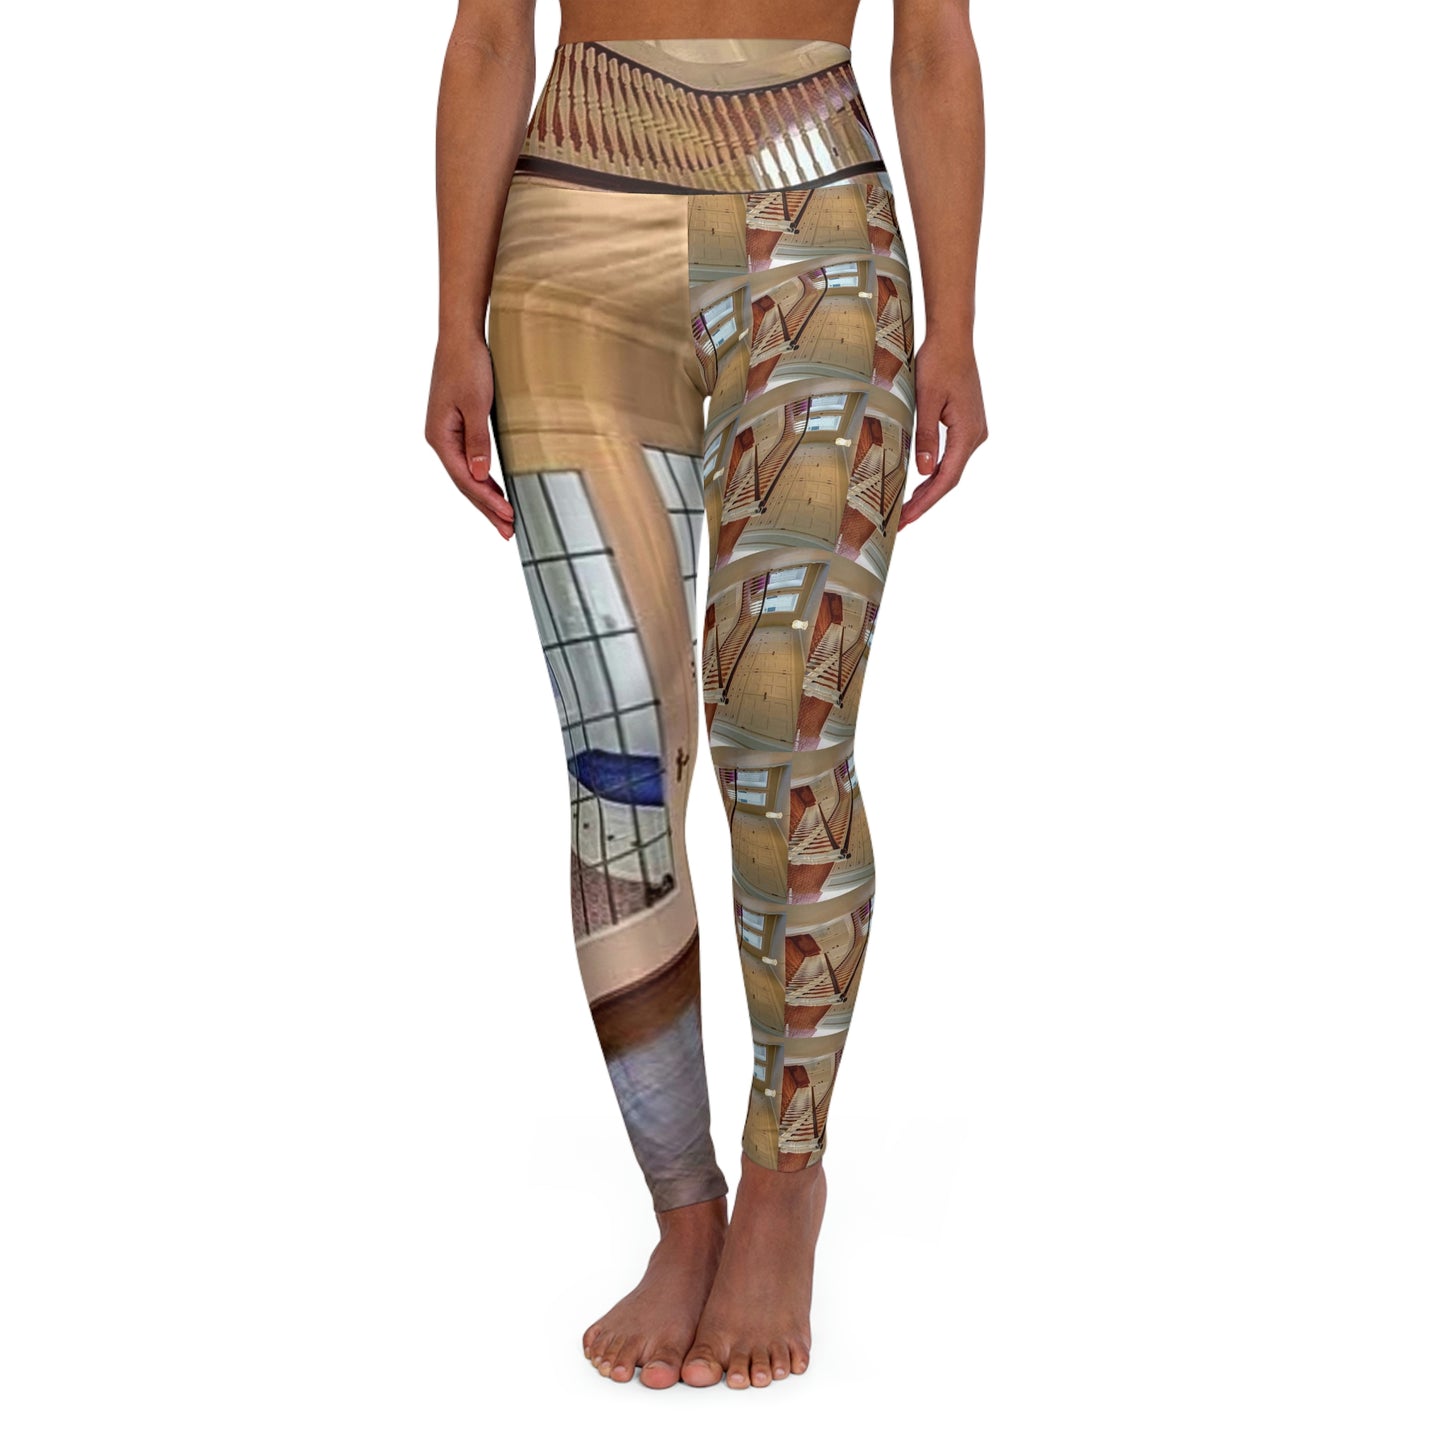 2800 S Main 45840 Housing Boom Collection High Waisted Yoga Leggings (AOP)